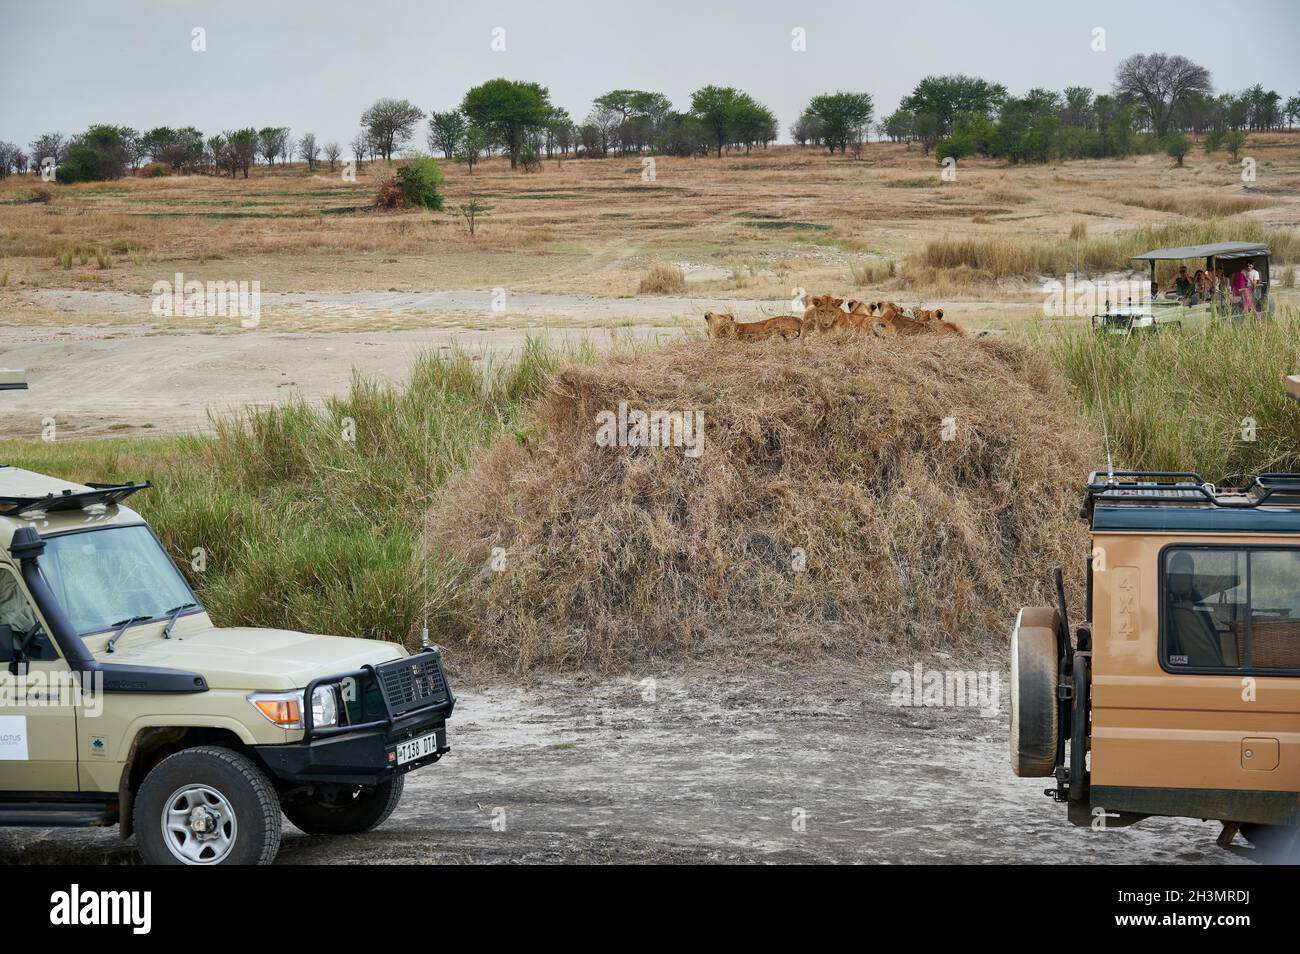 group of lion cubs, Panthera leo, surrounded by safari vehicles, Serengeti National Park, UNESCO world heritage site, Tanzania, Africa Stock Photo